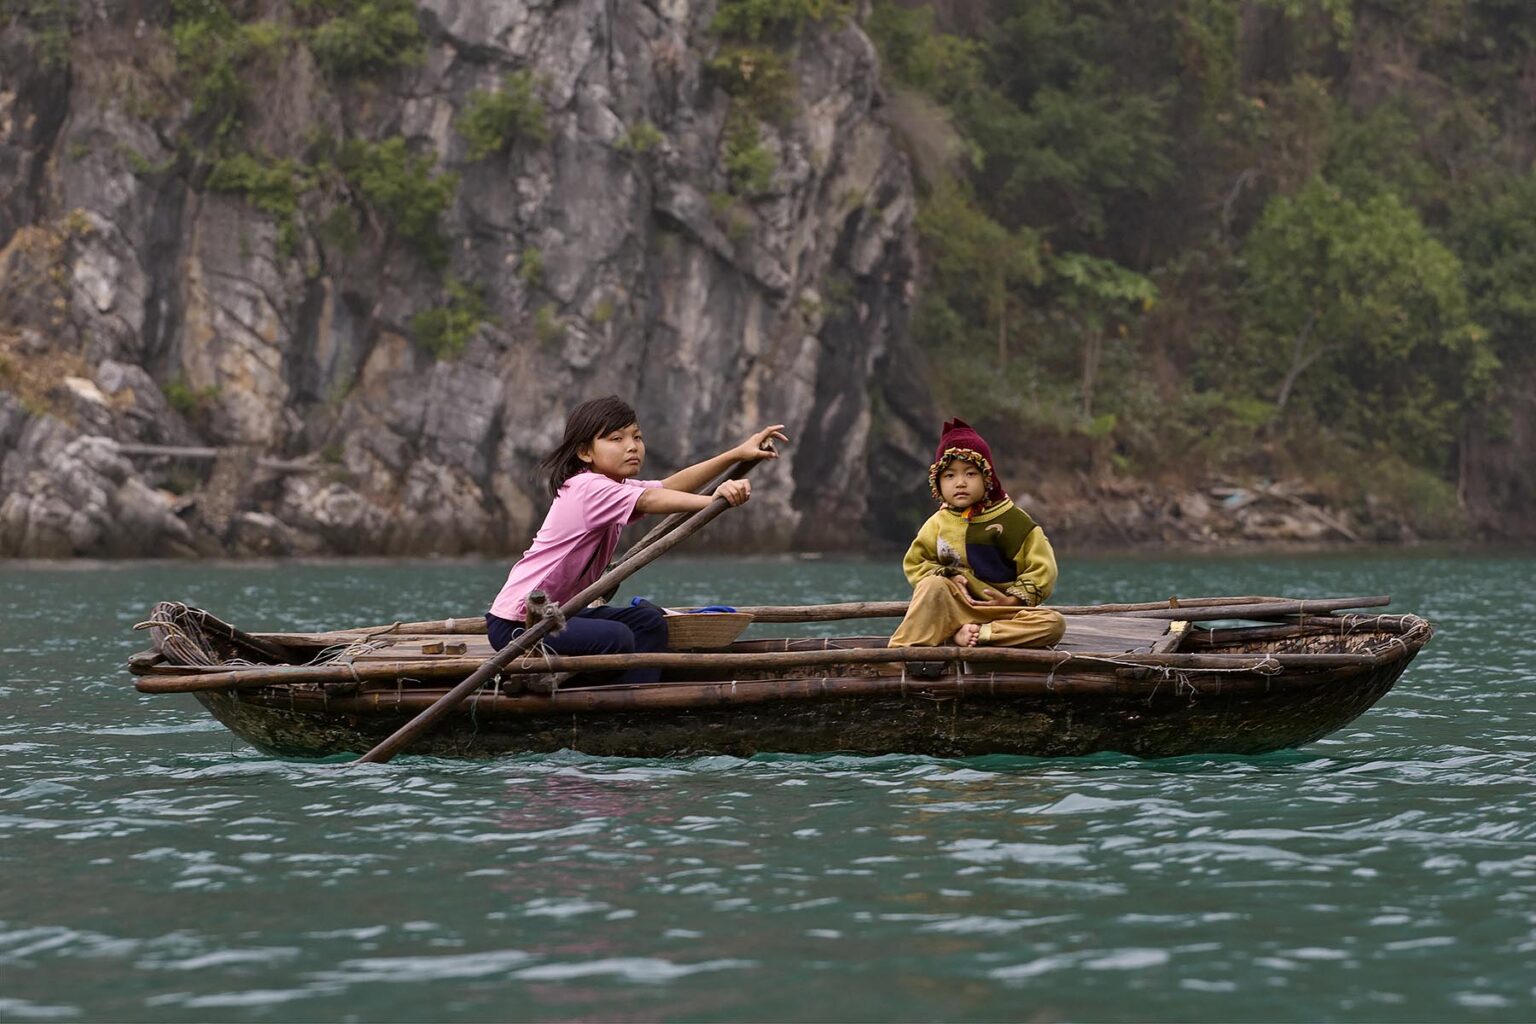 A young VIETNAMESE girl rows her sister in a small boat on the waters of HALONG BAY - VIETNAM